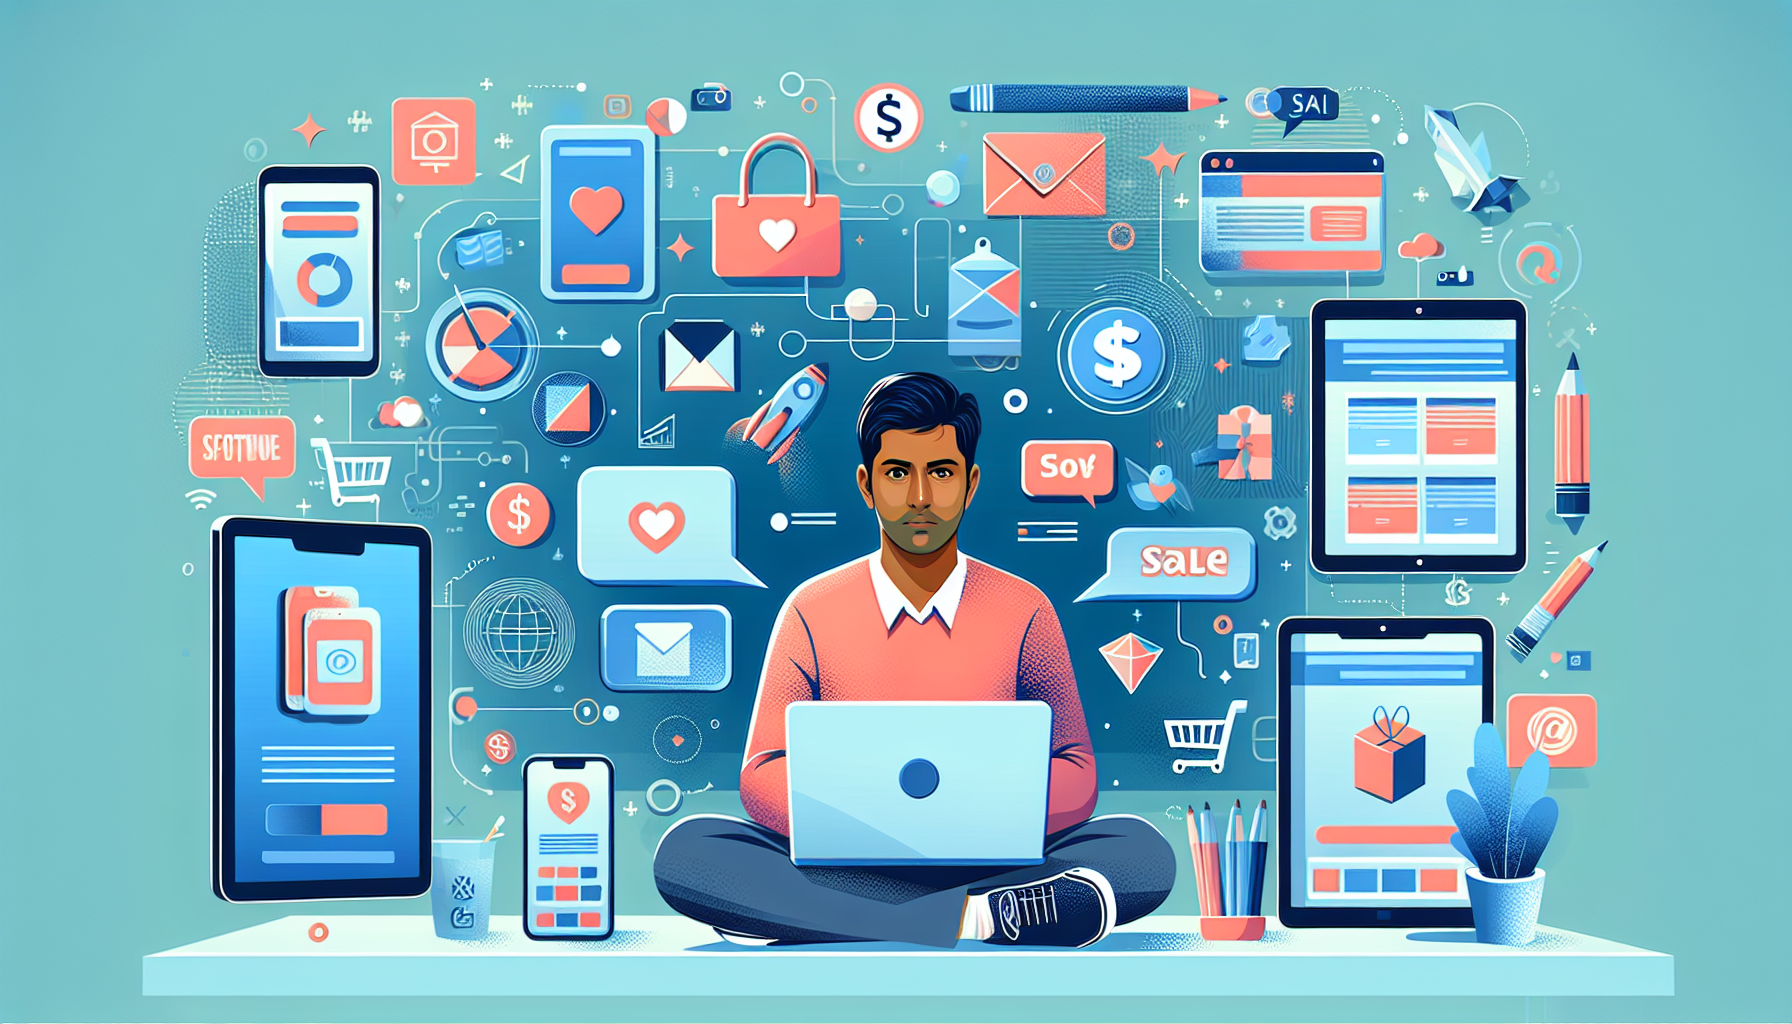 Create an image showing a person sitting at a desk, surrounded by digital devices like a laptop, tablet, and smartphone, with icons of various digital products such as e-books, software, courses, and